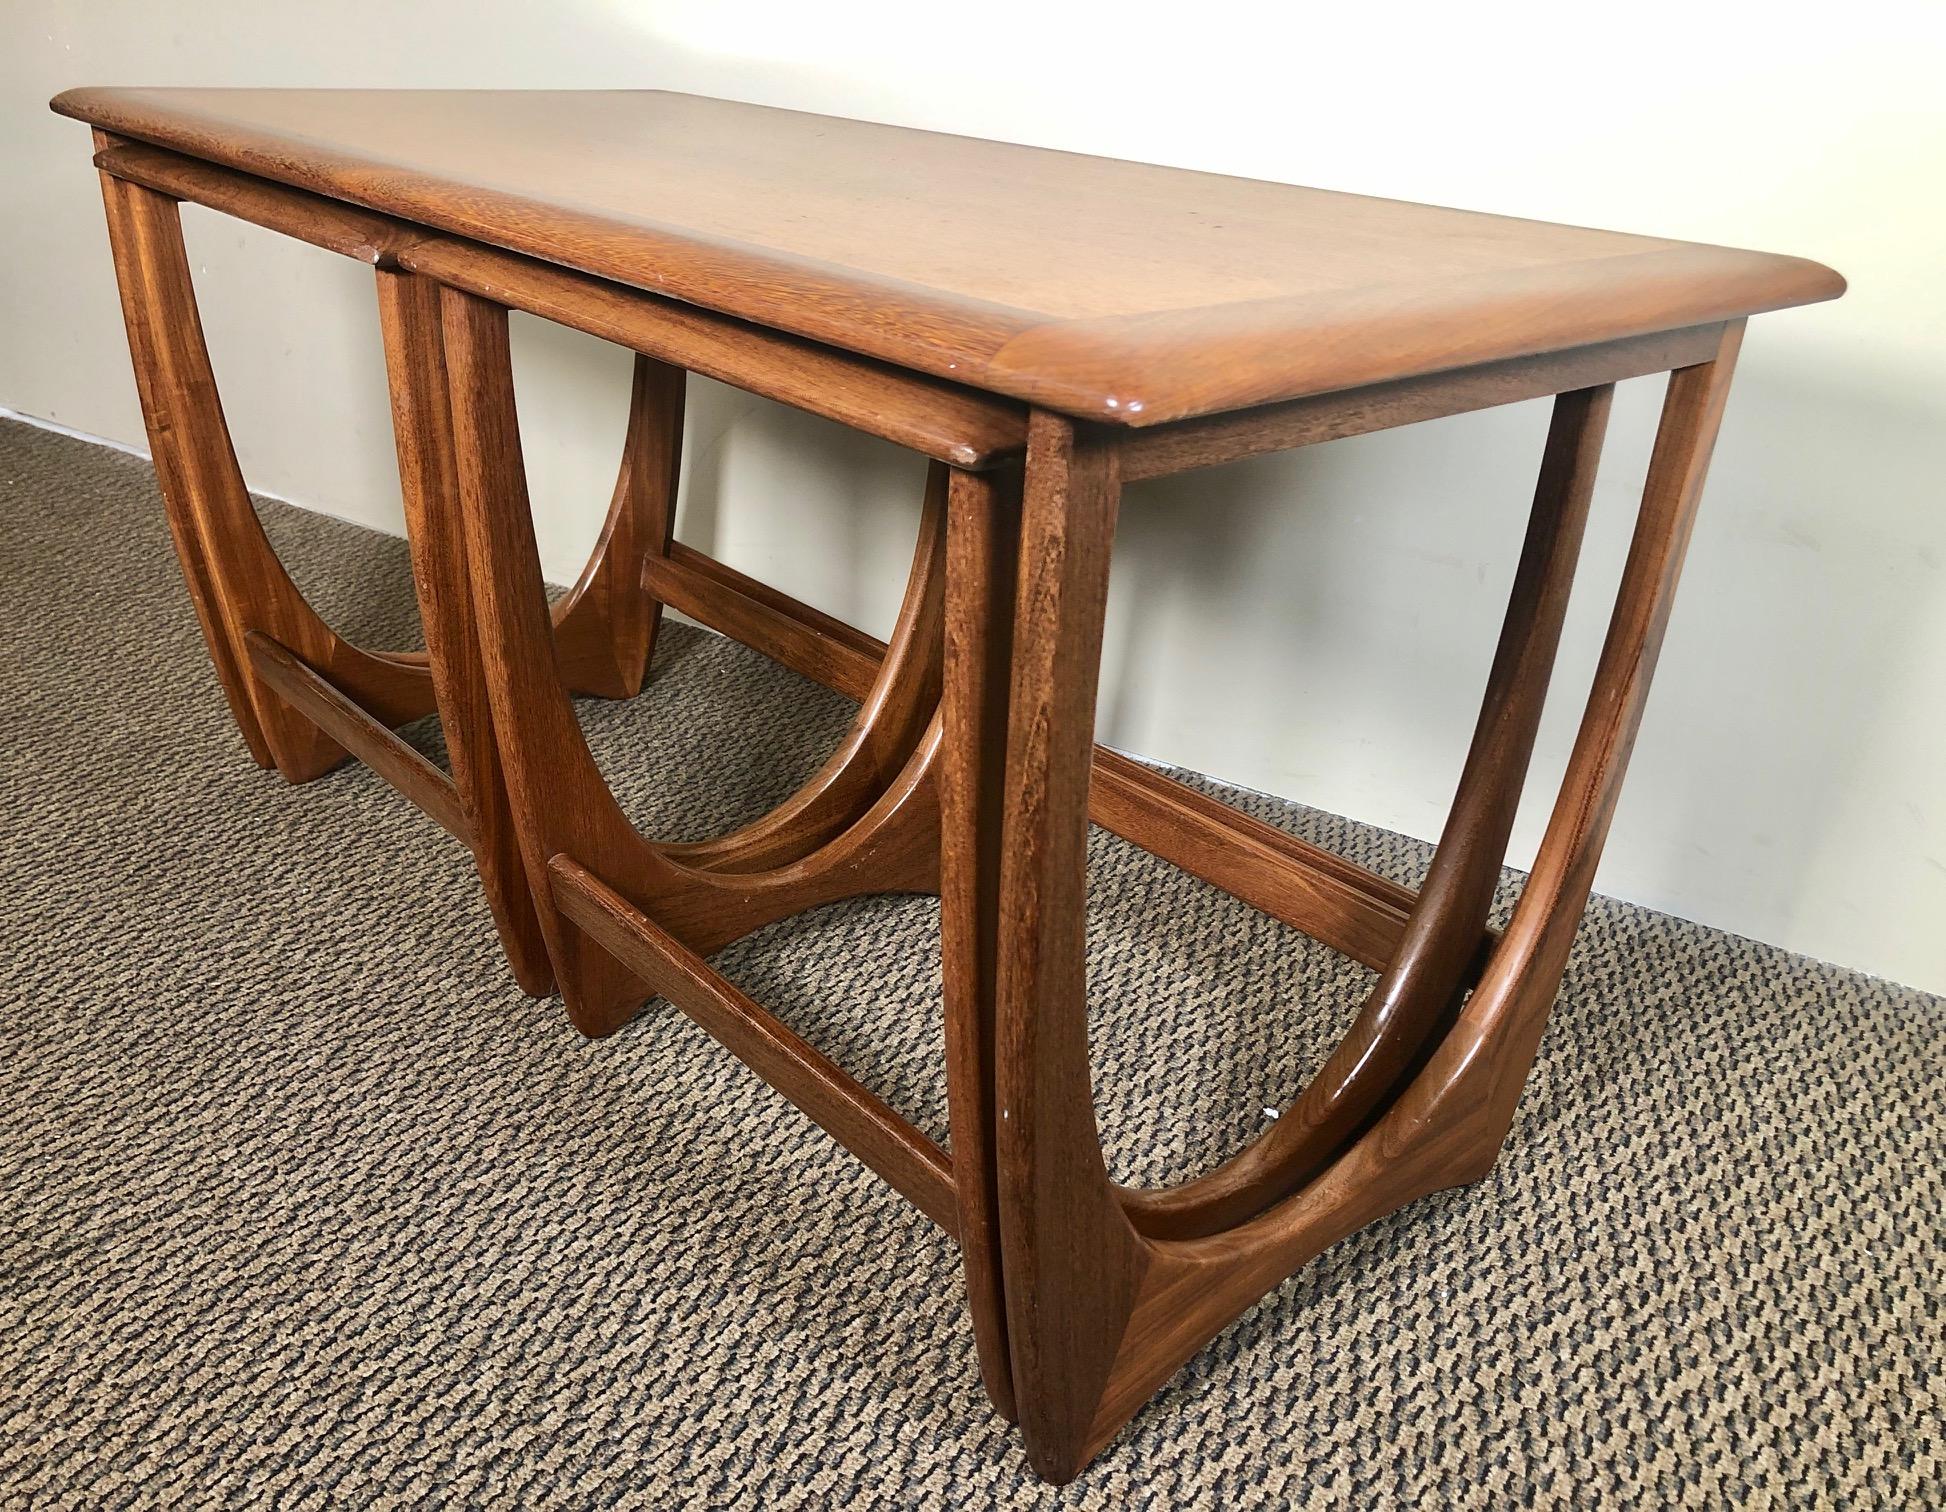 This is a gorgeous teak nesting coffee table with a beautiful leg design. Made by G Plan. 

Excellent condition. Minor signs of wear. Some small gouges but well looked after over the years.

Dimensions: L x W x H

Main table 39